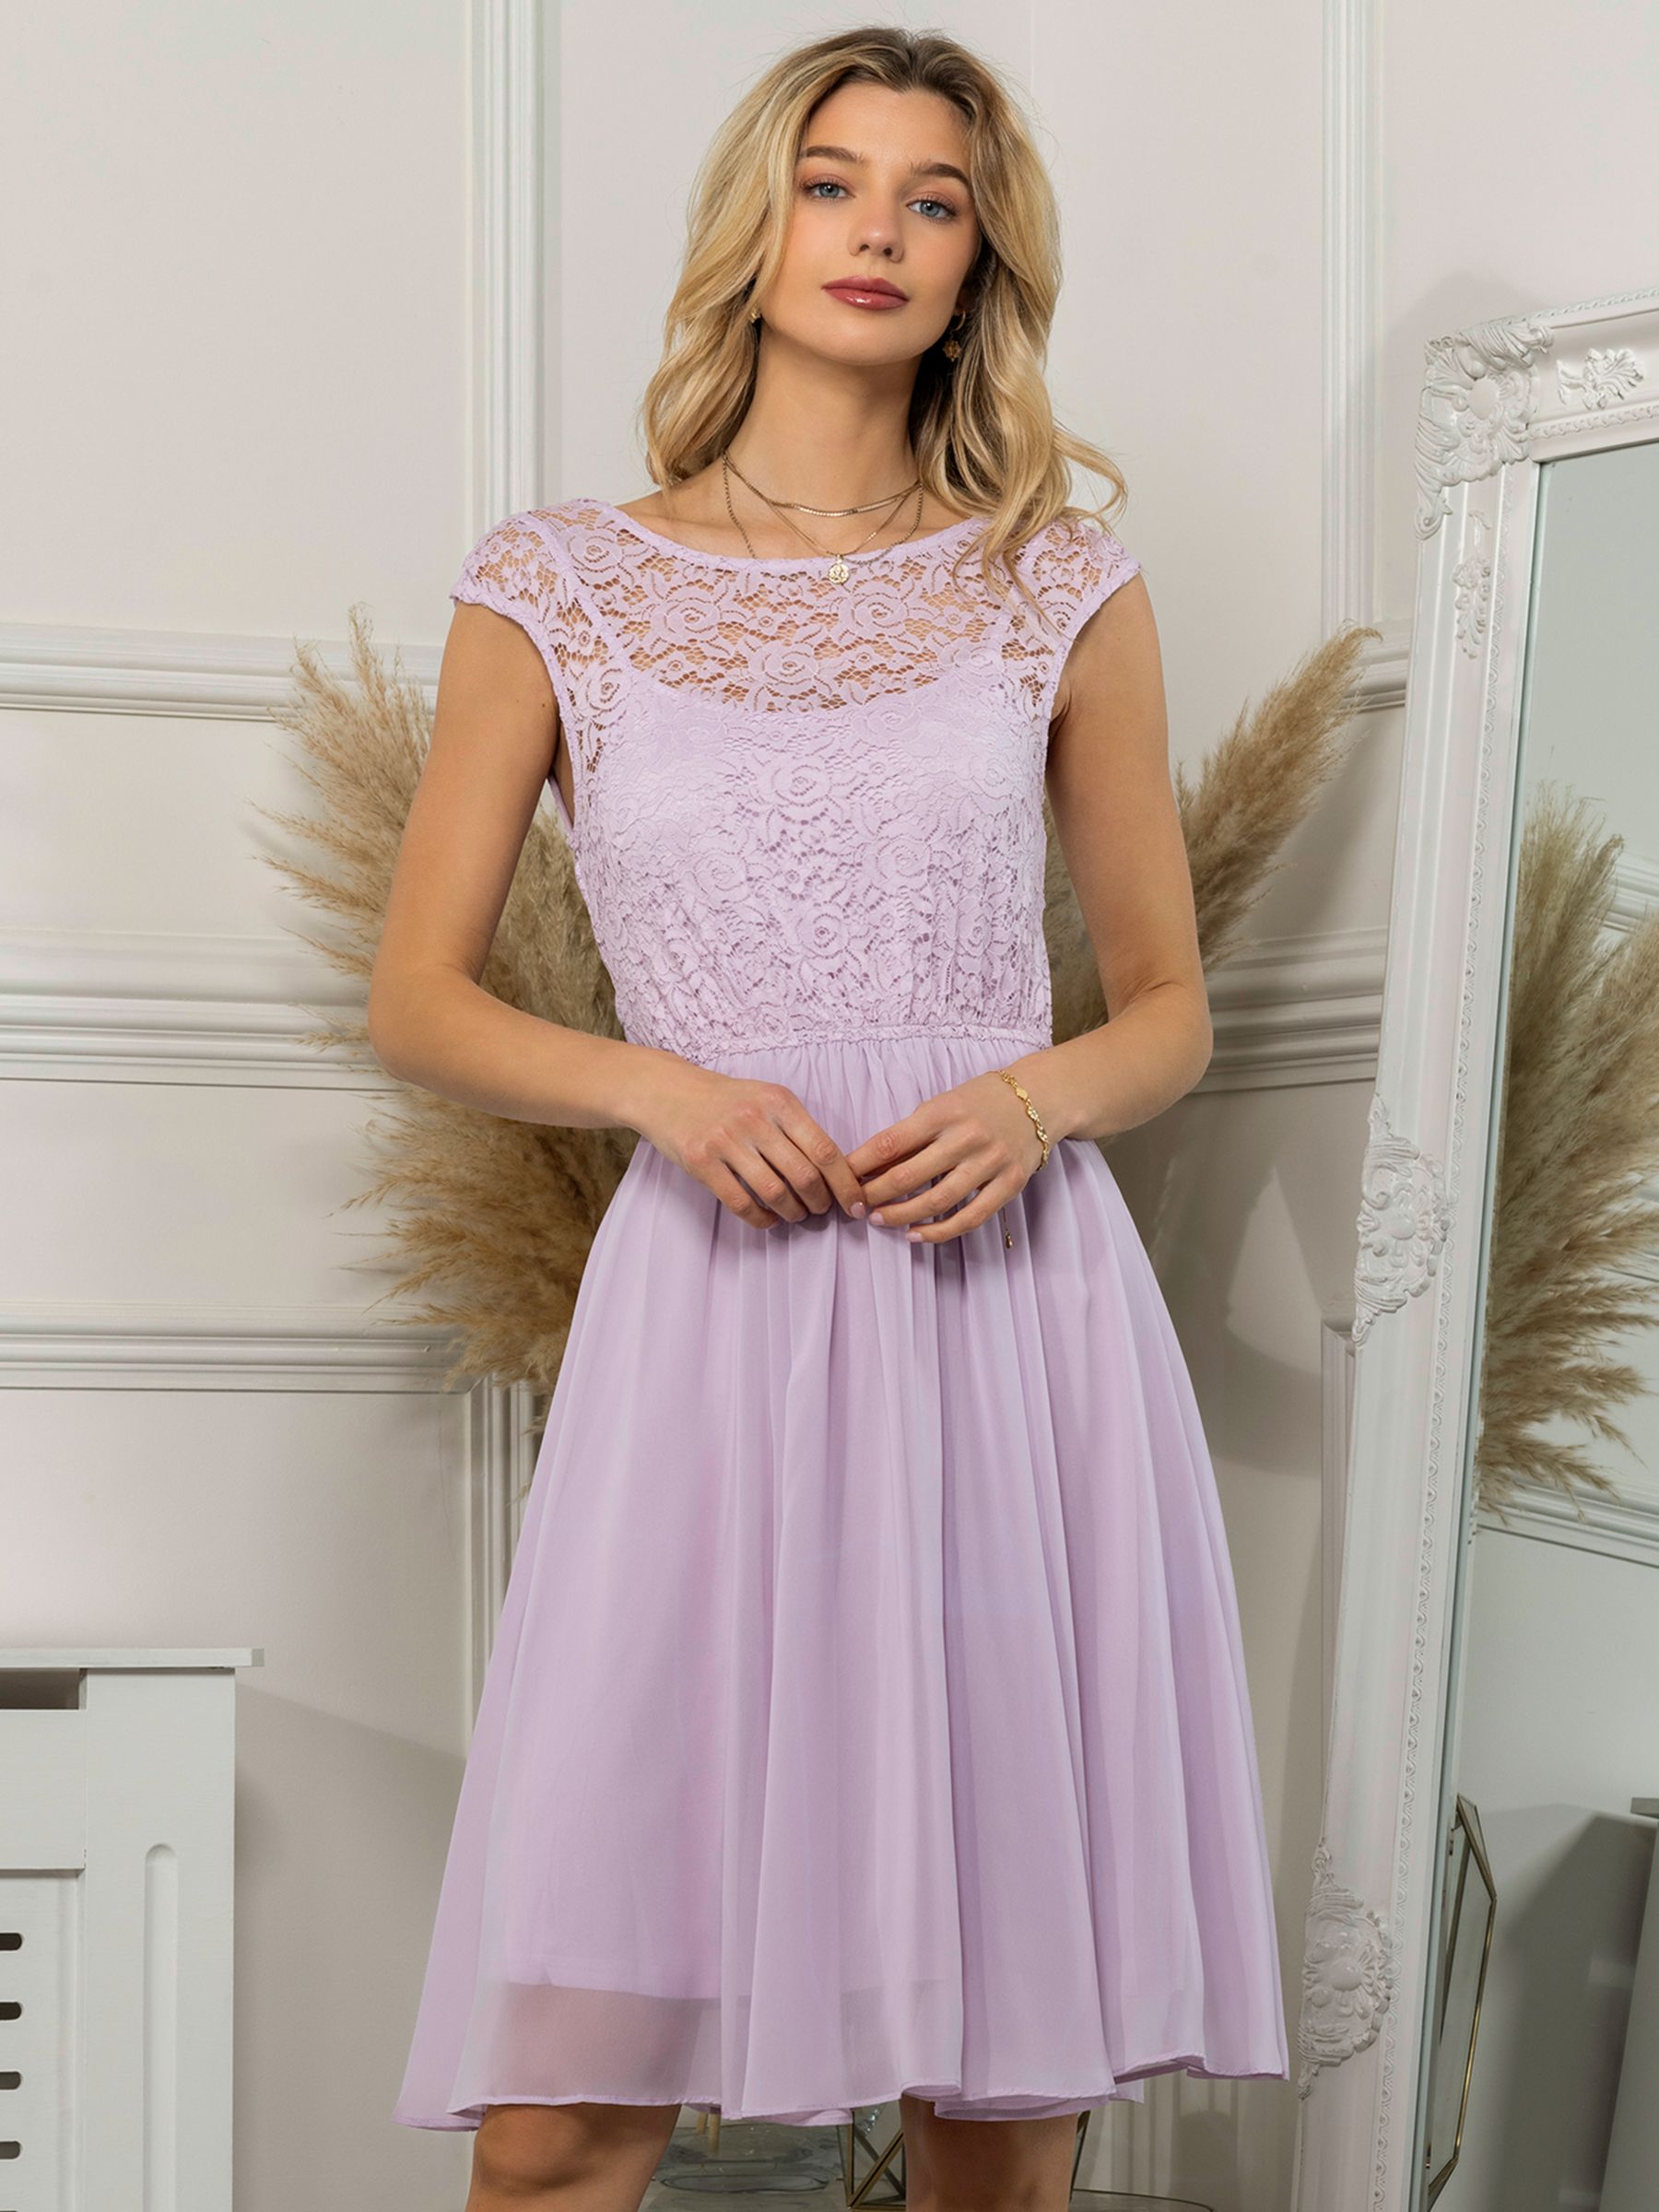 Buy Jolie Moi Lace Bodice Flared Dress, Lilac Online at johnlewis.com